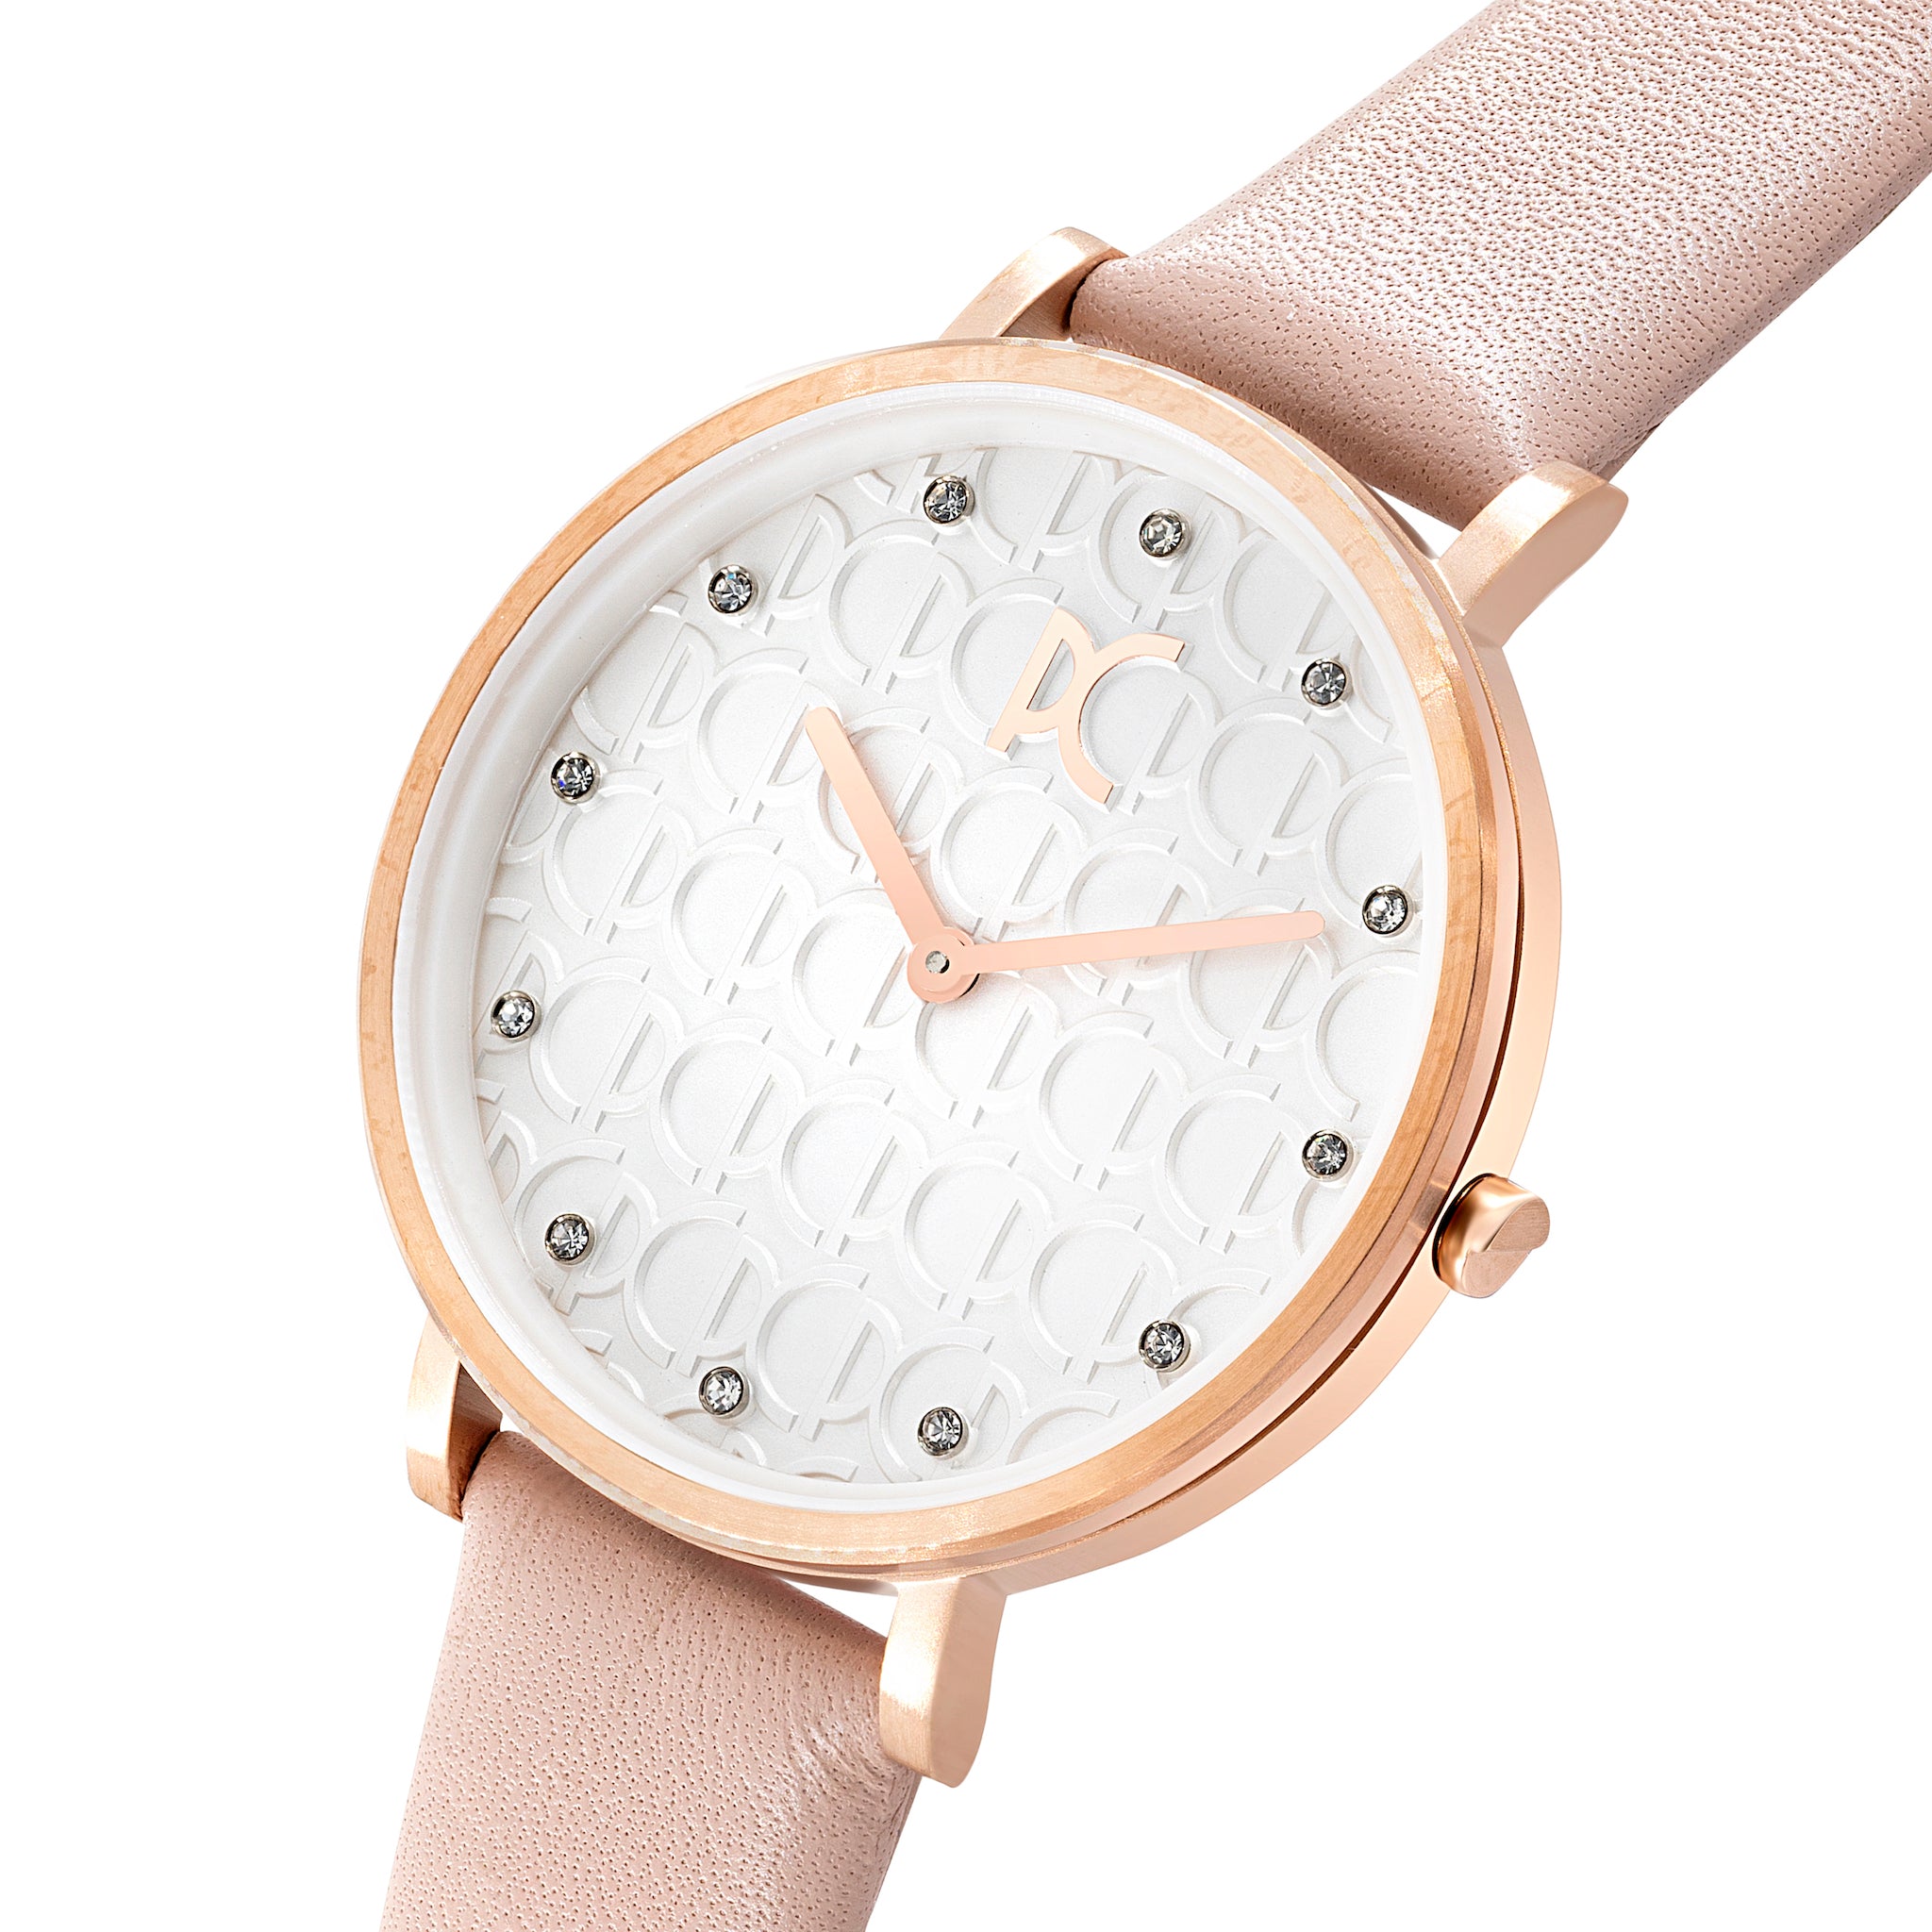 WOMEN'S ROSE GOLD WATCHES – Pierre Cardin Watches